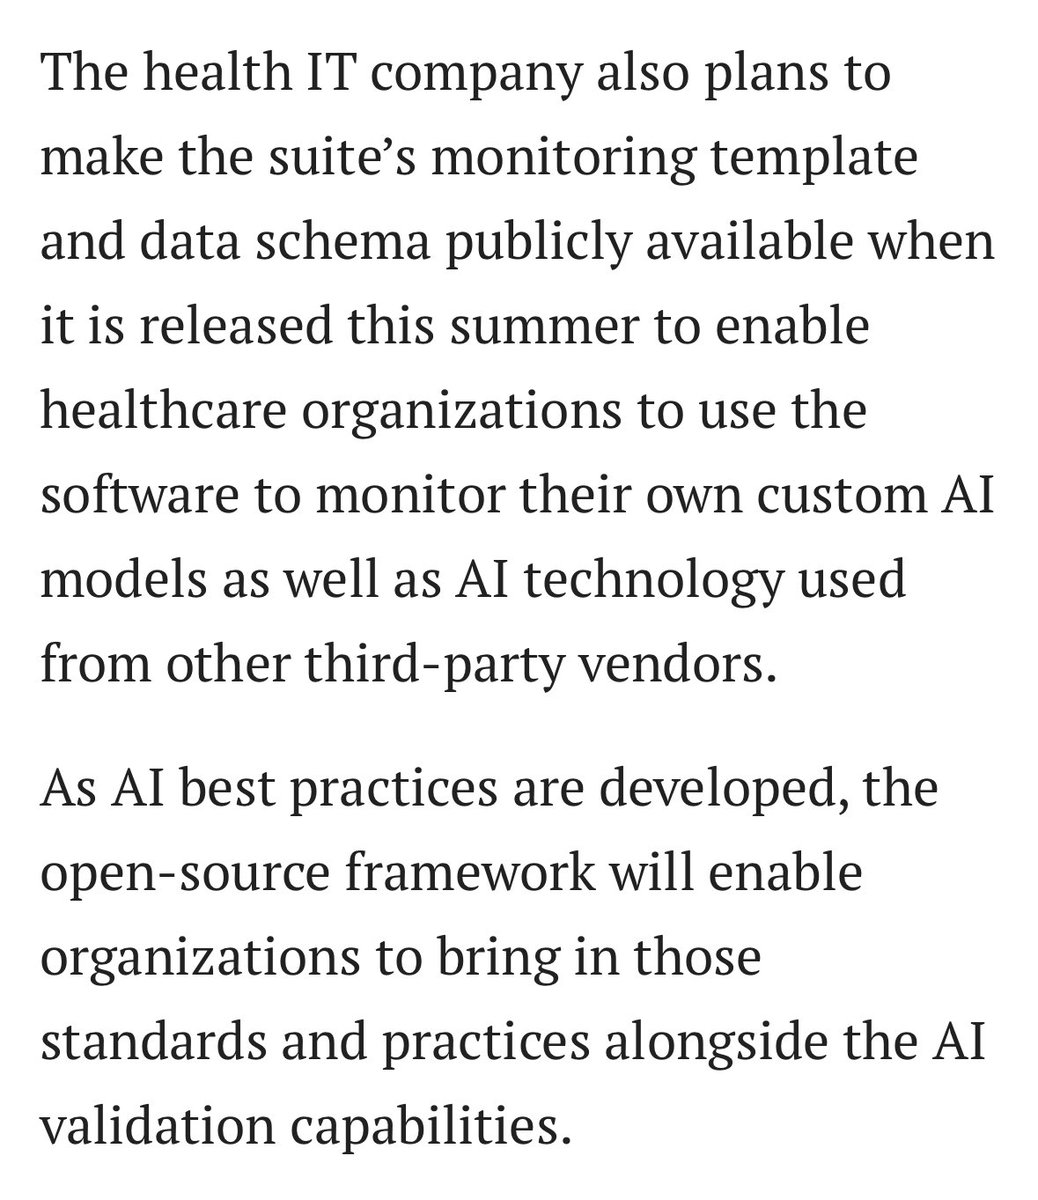 While evaluation is challenging for many reasons (outcome and predictor definitions, time stamps, use case diffs), releasing open-source software to better standardize evals is 100% the right move by Epic. Opens work up to both critique and improvement. fiercehealthcare.com/ai-and-machine…